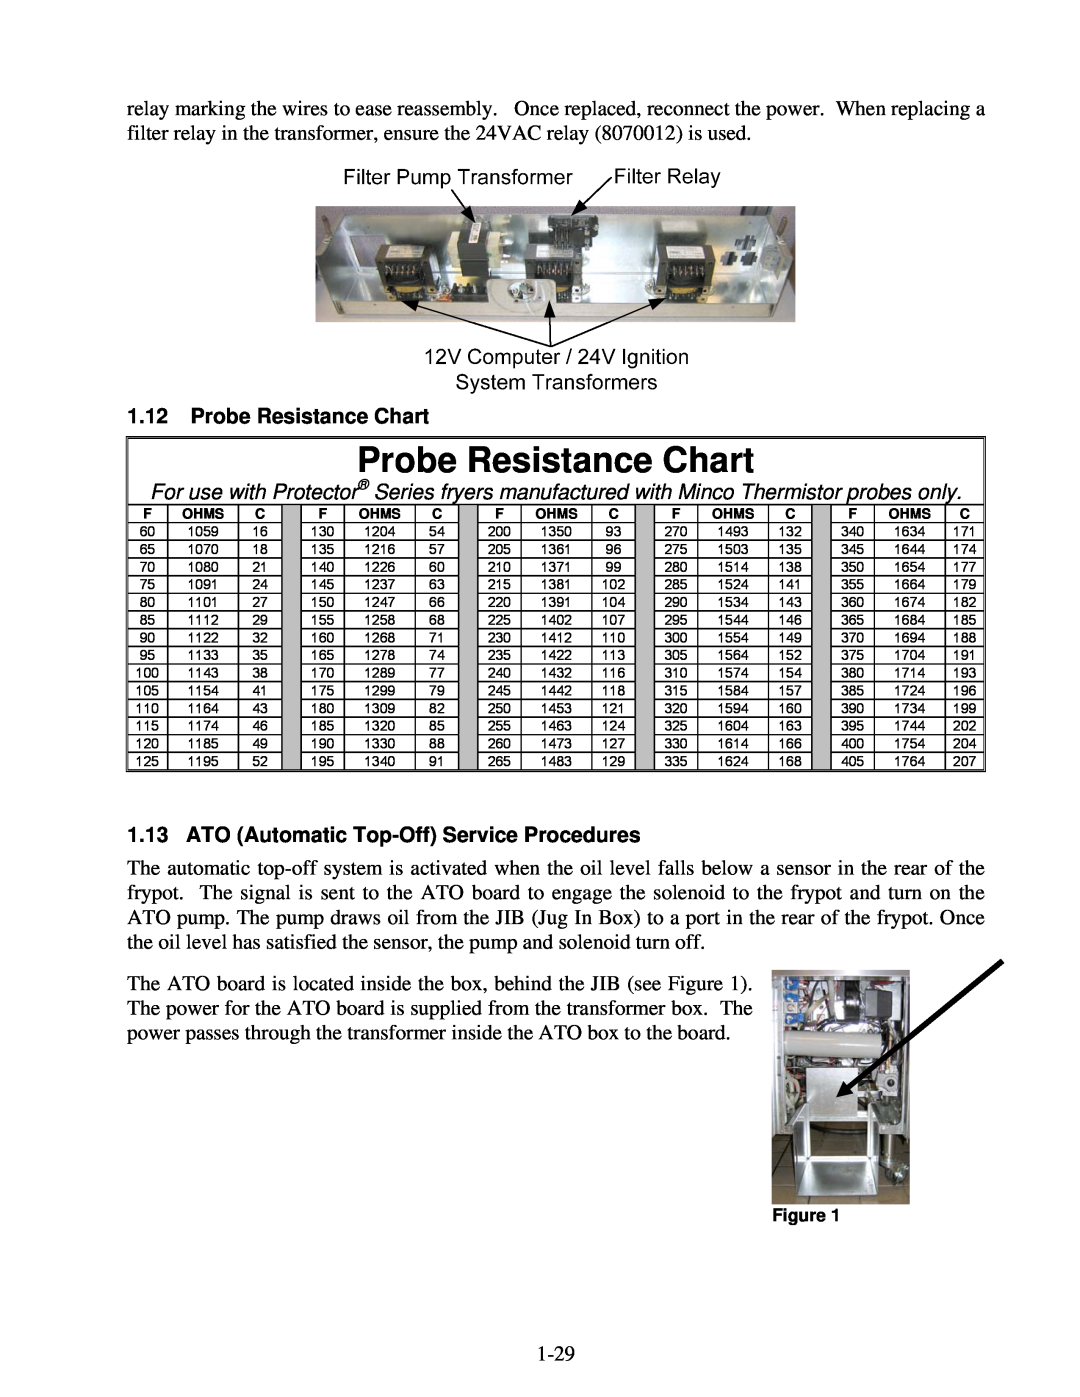 Frymaster 8196345 manual 1.12Probe Resistance Chart, ATO Automatic Top-OffService Procedures 